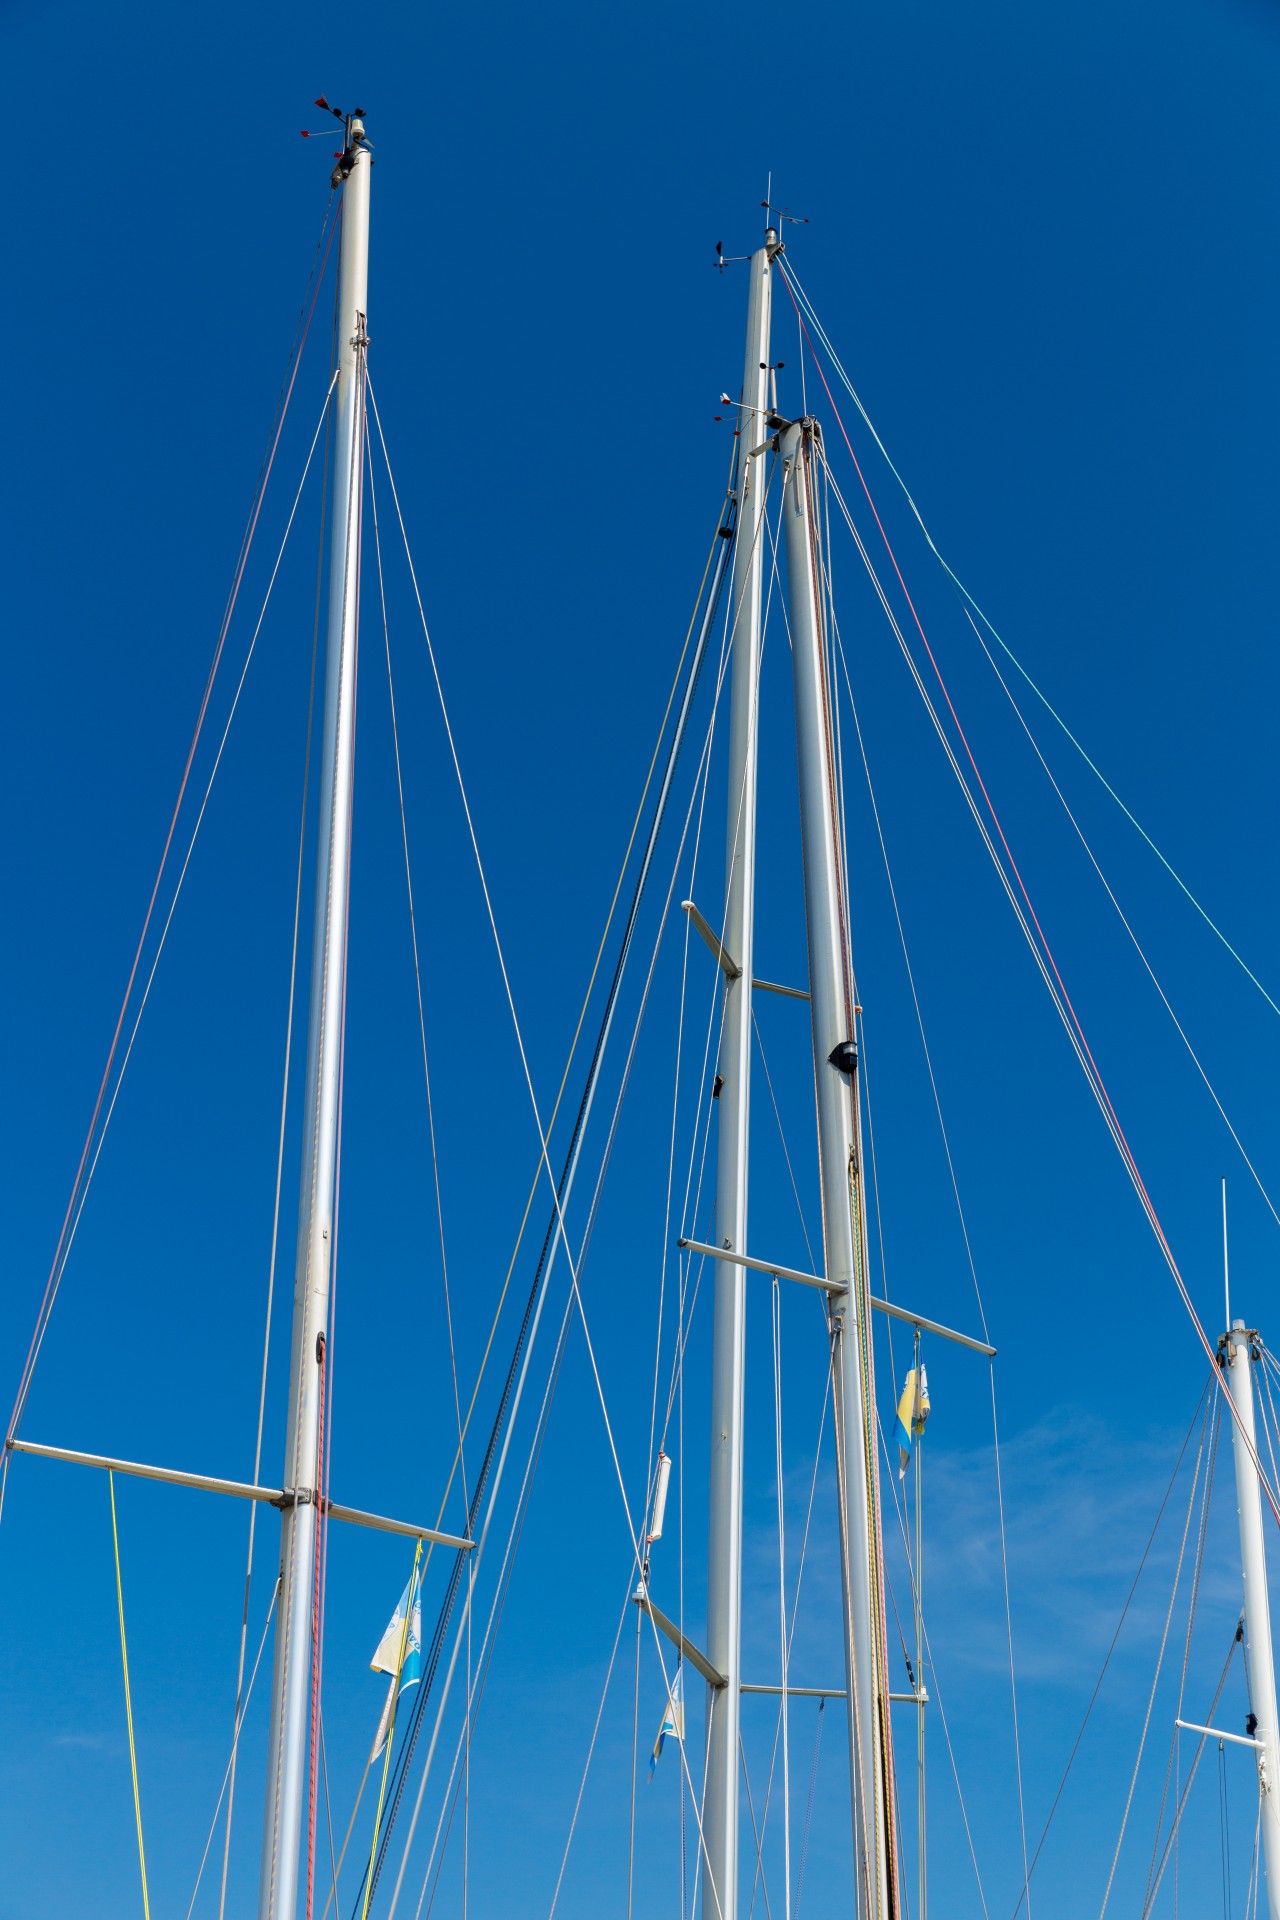 sailboat with 4 masts